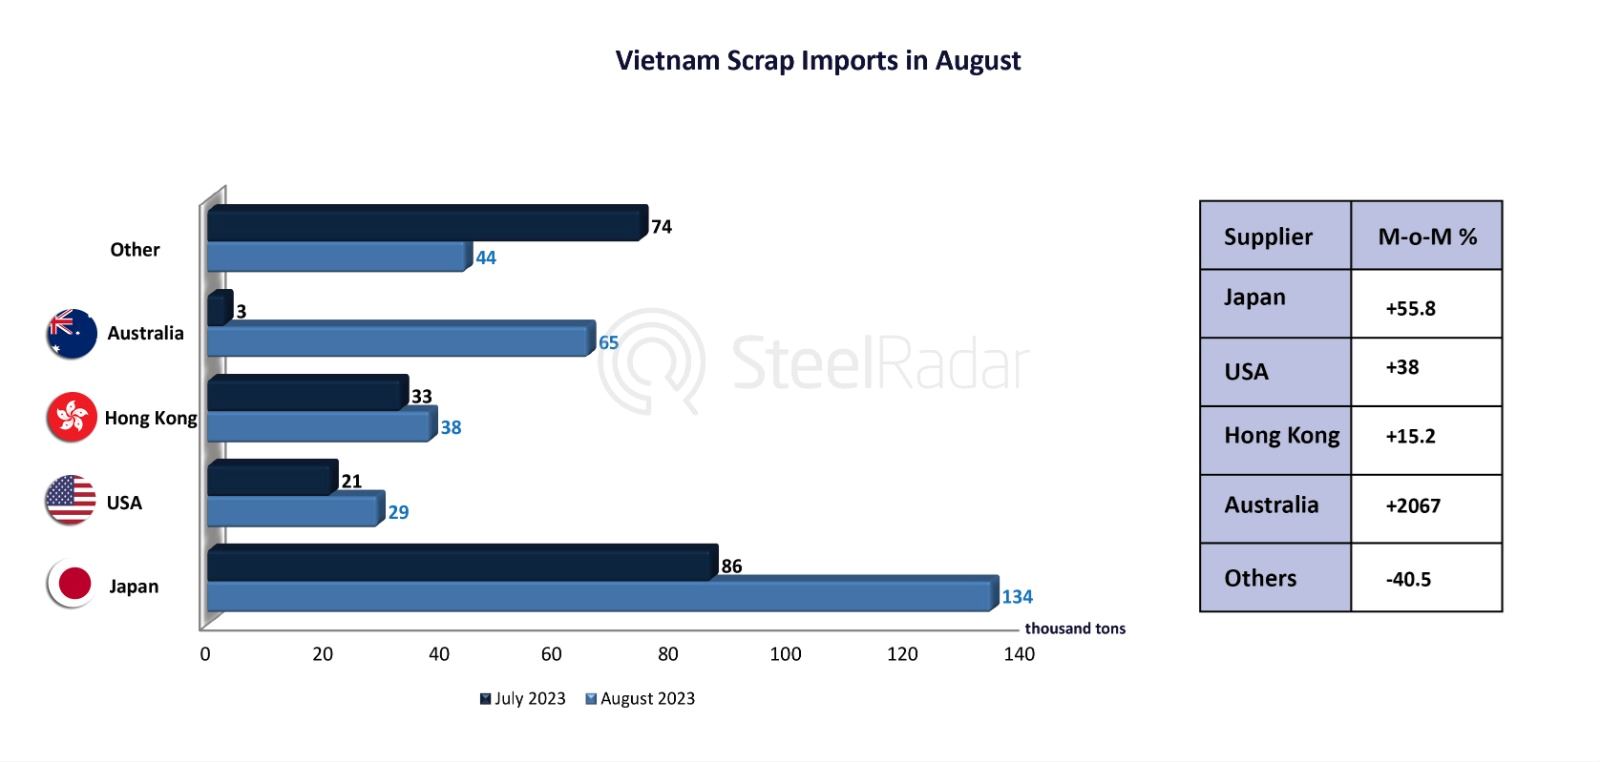 Vietnam’s scrap imports increased by 43.1% 